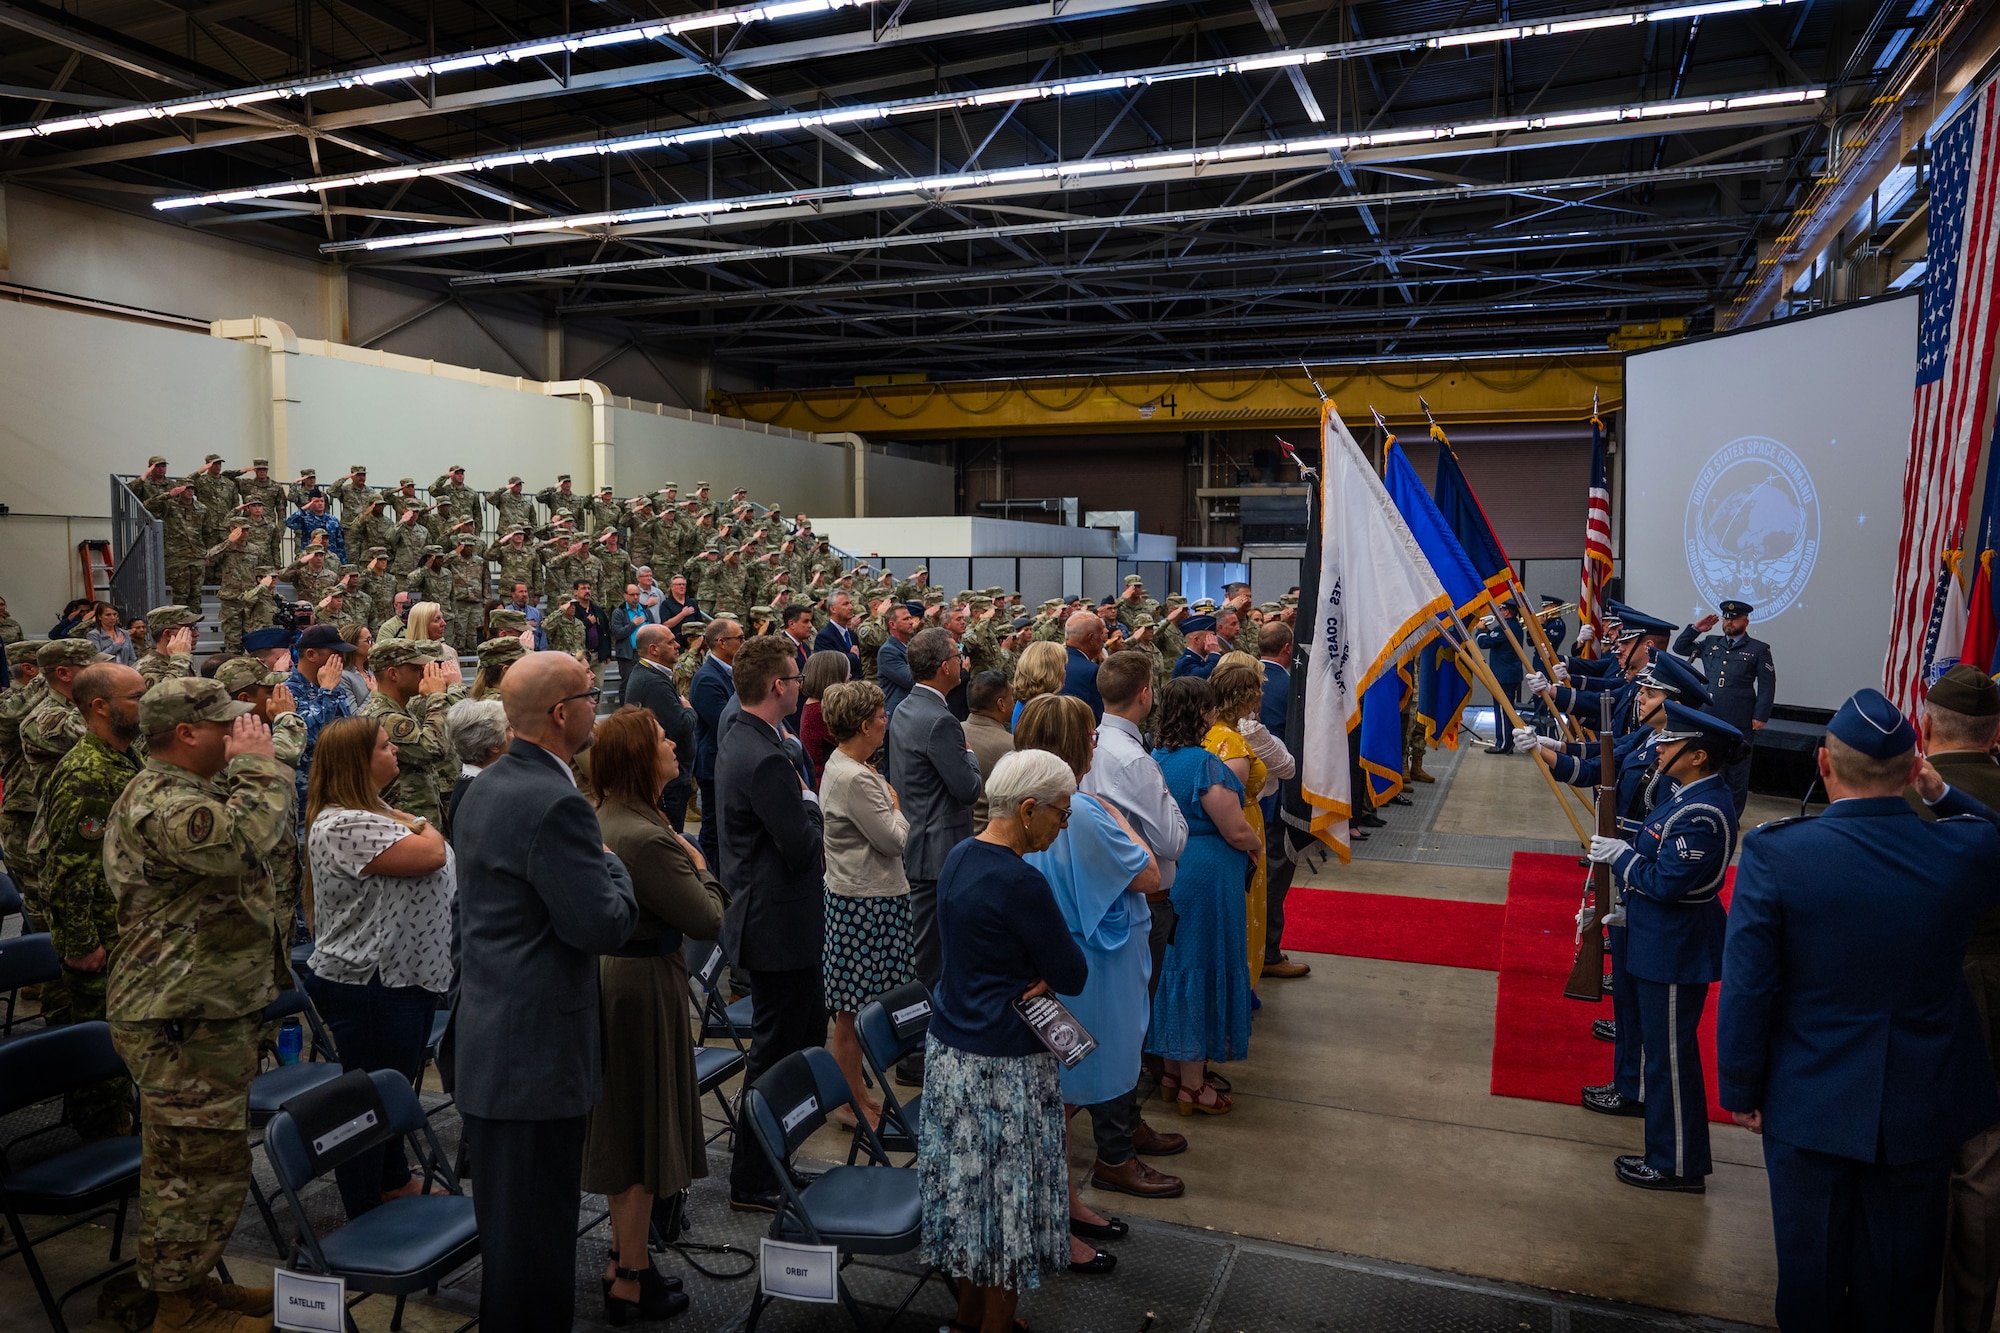 Attendees of the Combined Force Space Component Command (CFSCC) change of command ceremony stand during the National Anthem at Vandenberg Space Force Base, Calif., Aug. 22, 2022. More than 350 people attended the event, both in-person and virtually, to welcome incoming CFSCC commander, Maj. Gen. Douglas A. Schiess, and also say farewell to the outgoing CFSCC commander Maj. Gen. DeAnna M. Burt, after she served as the unit’s commander for 21 months. (U.S. Space Force photo by Tech. Sgt. Luke Kitterman)